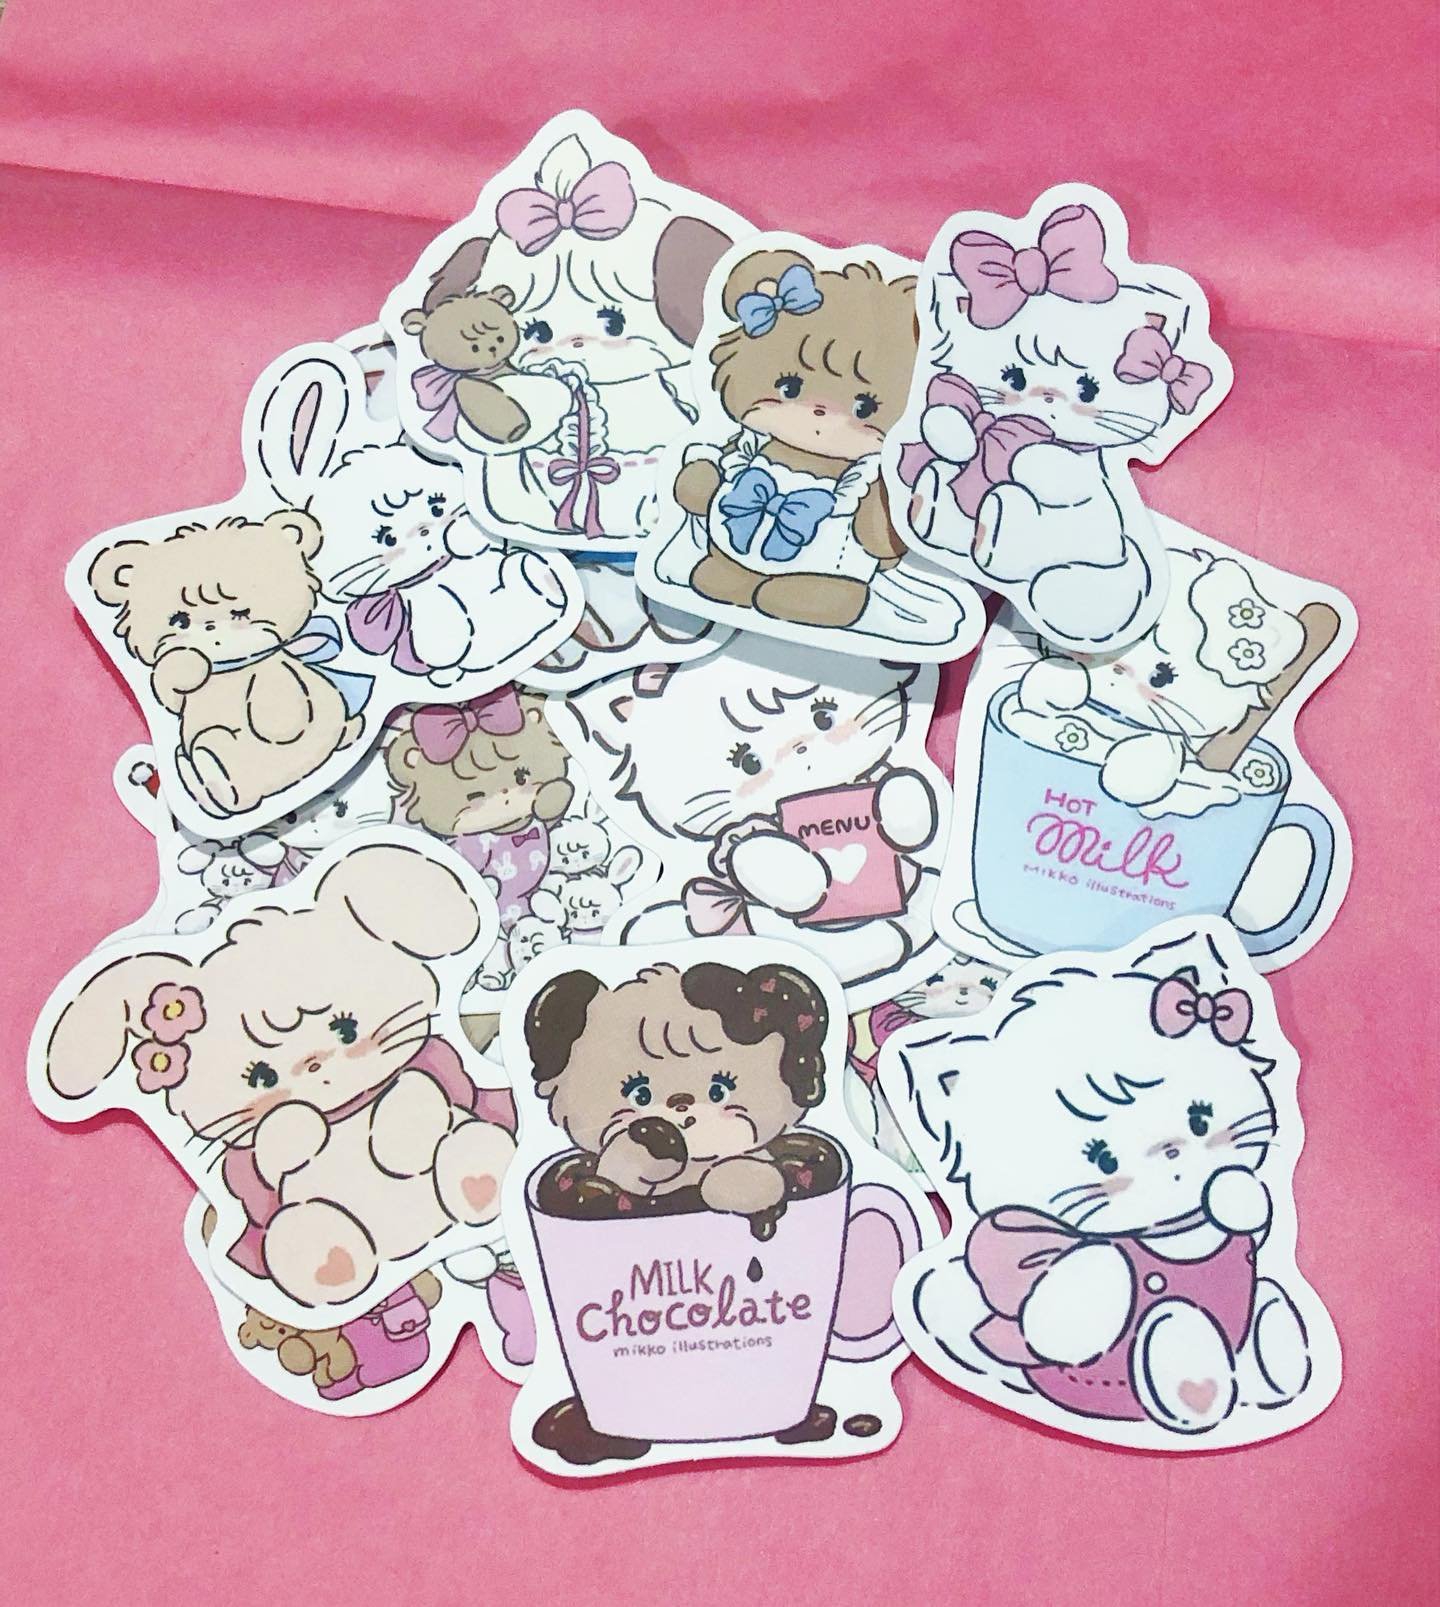 Cute stickers come with every beauty order like these!! Aren&rsquo;t they sweet!? 💕🎀🌸
.
#margaritabloom #stickers #freestickers #kawaii #kawaiistickers #beauty #bathandbody #prettythings #beautytips #beautybloggers #soapmaking #gifts #freebies #se